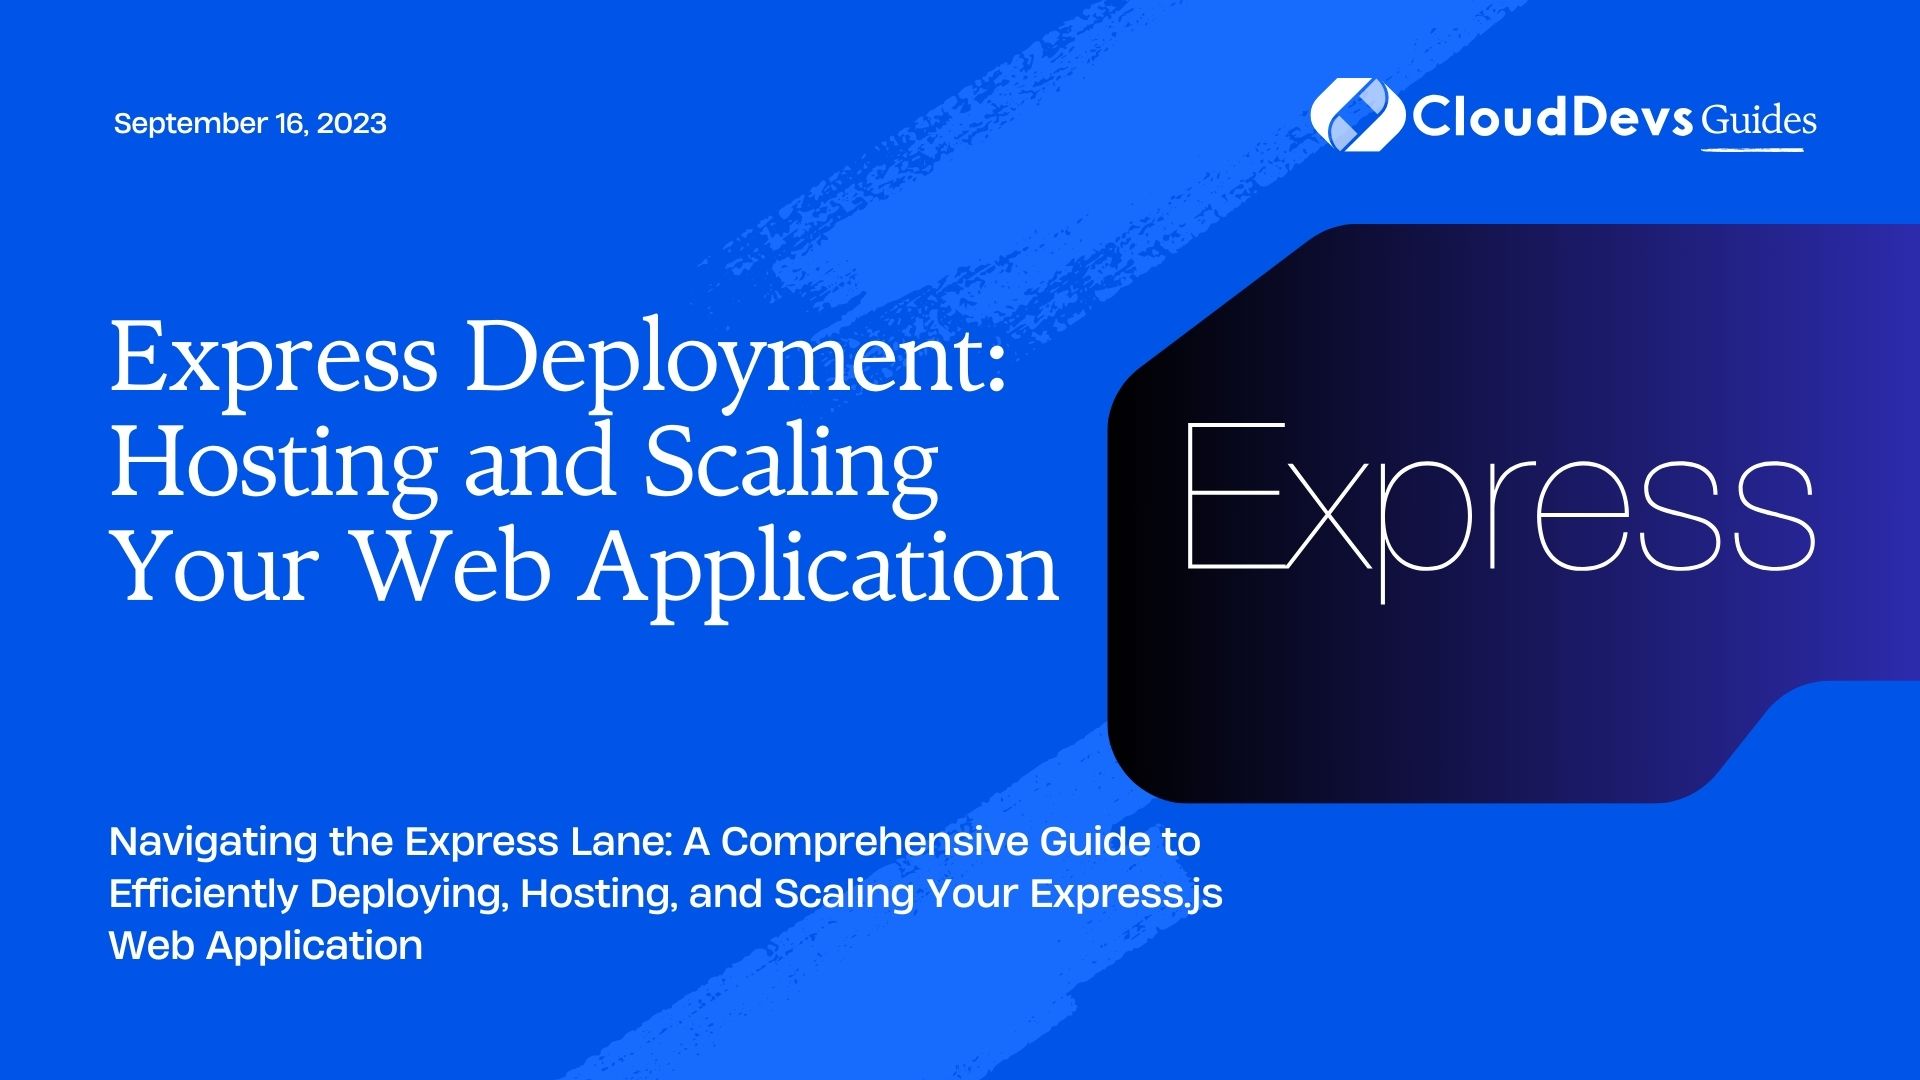 Express Deployment: Hosting and Scaling Your Web Application